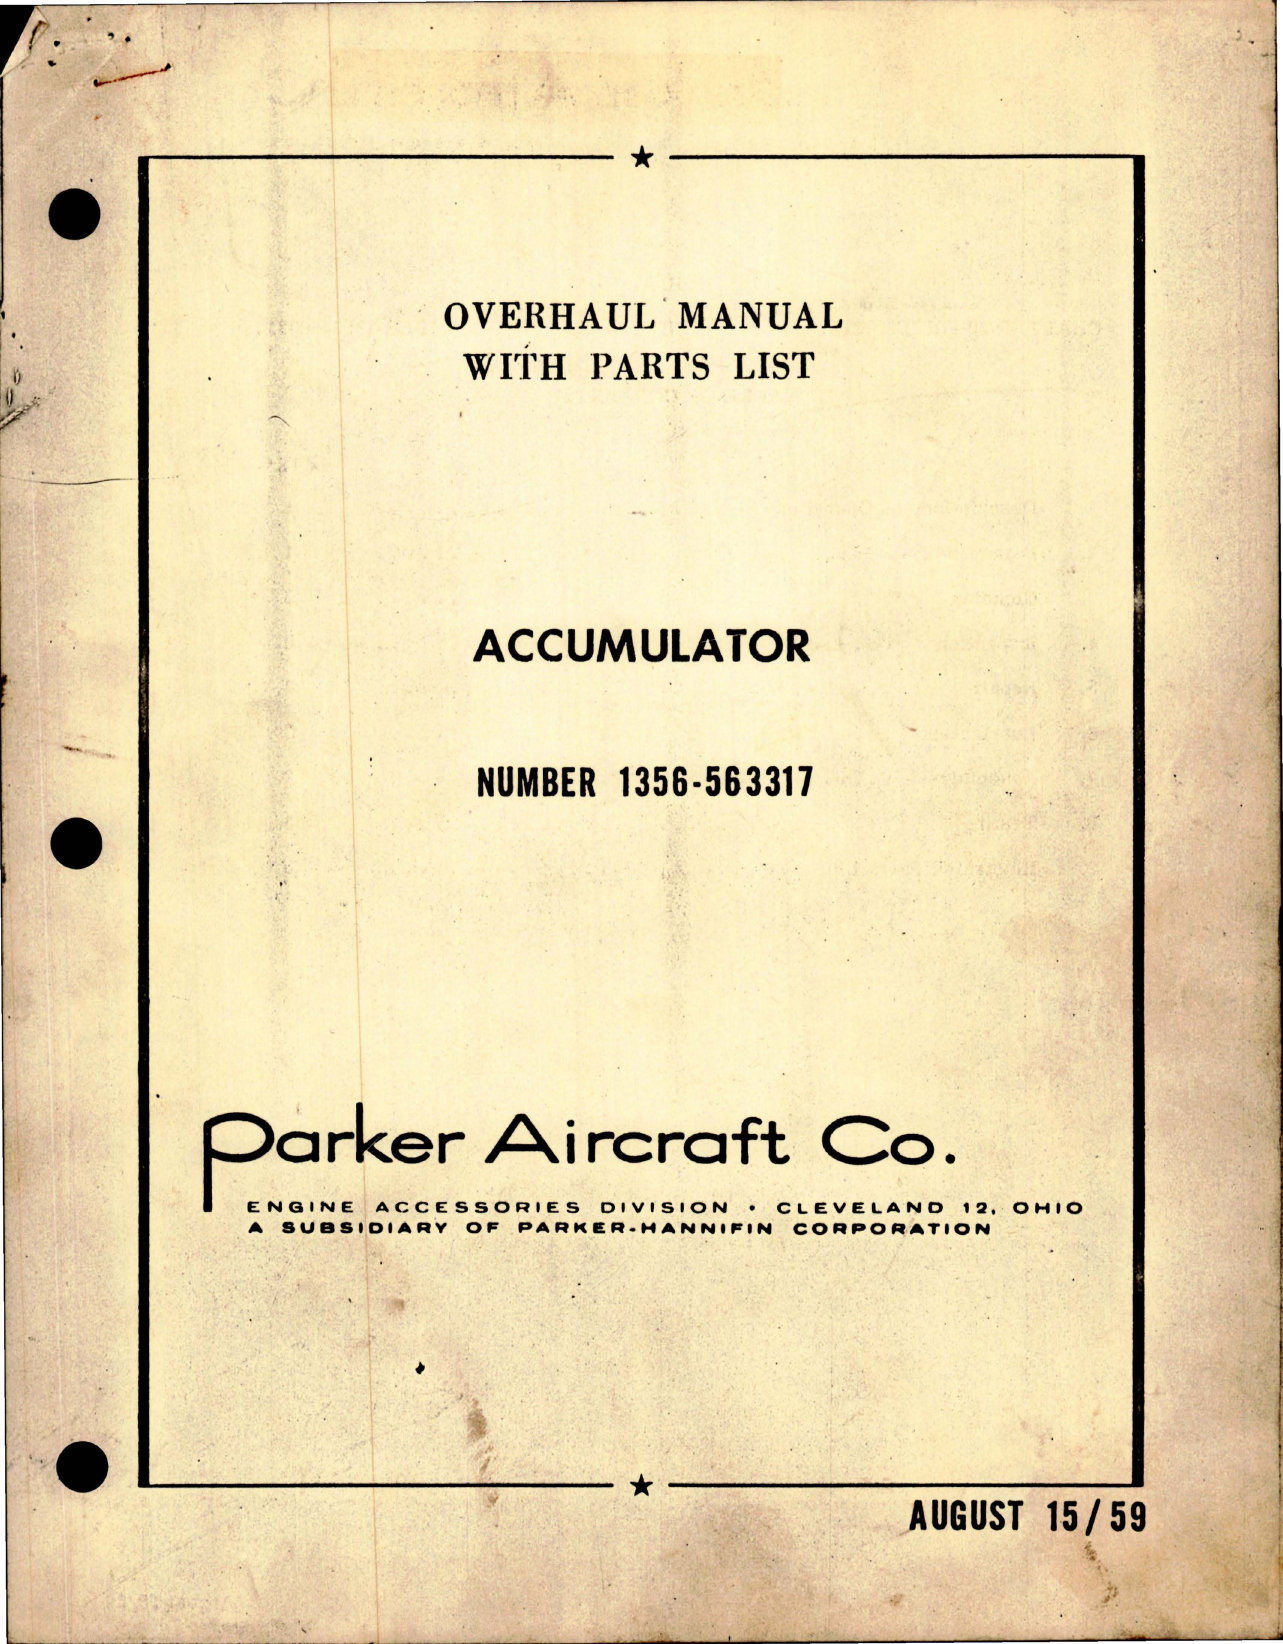 Sample page 1 from AirCorps Library document: Overhaul Manual with Parts List for Hydraulic Power Accumulator - Part 1356-563317 